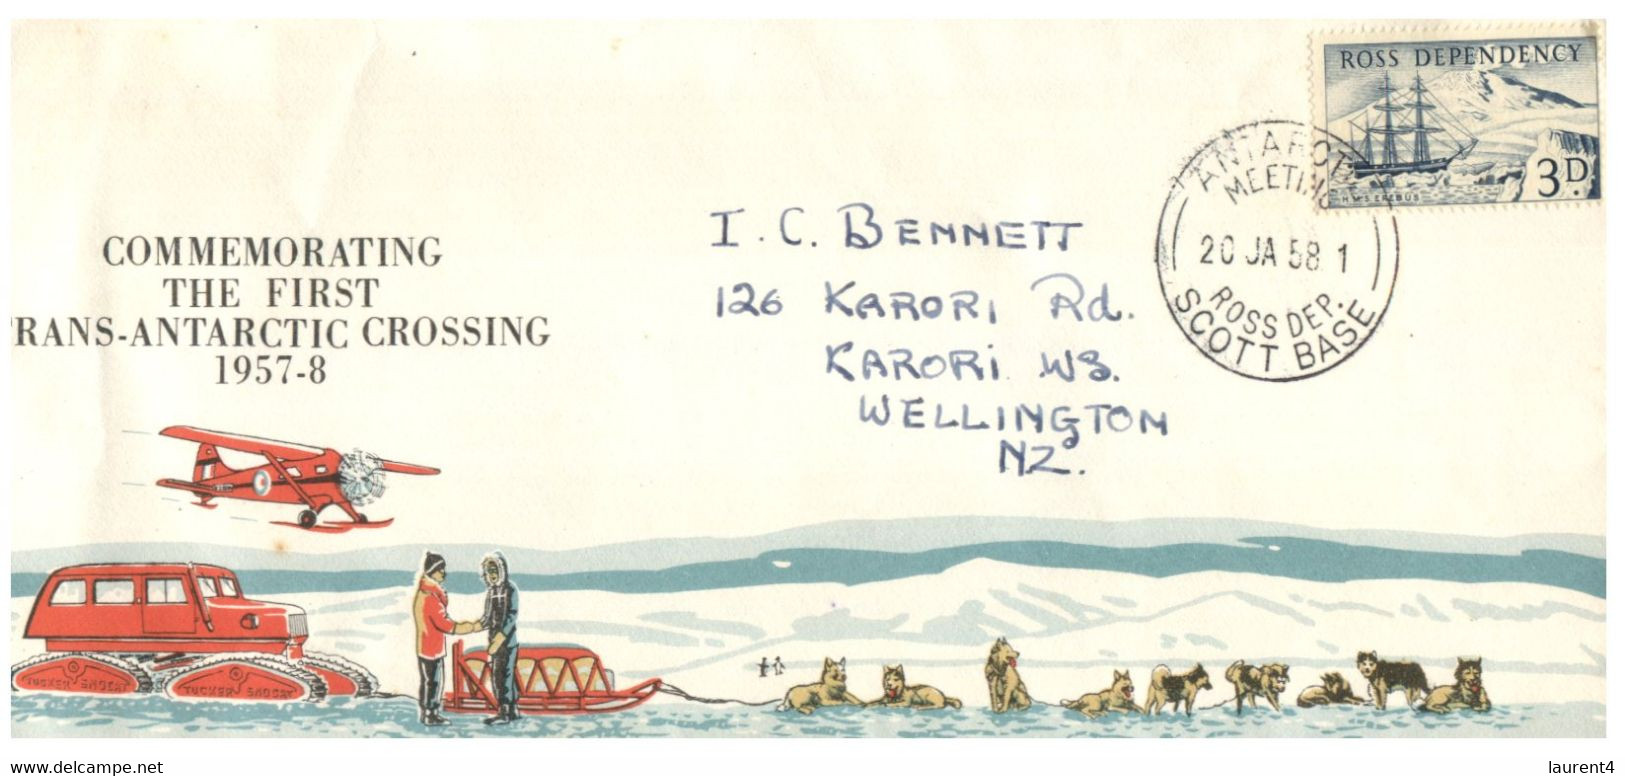 (NN 30) Ross Dependency Cover (New Zealand) - Commemorating The First Trans-Antarctic Crossing 1957-58 - Lettres & Documents